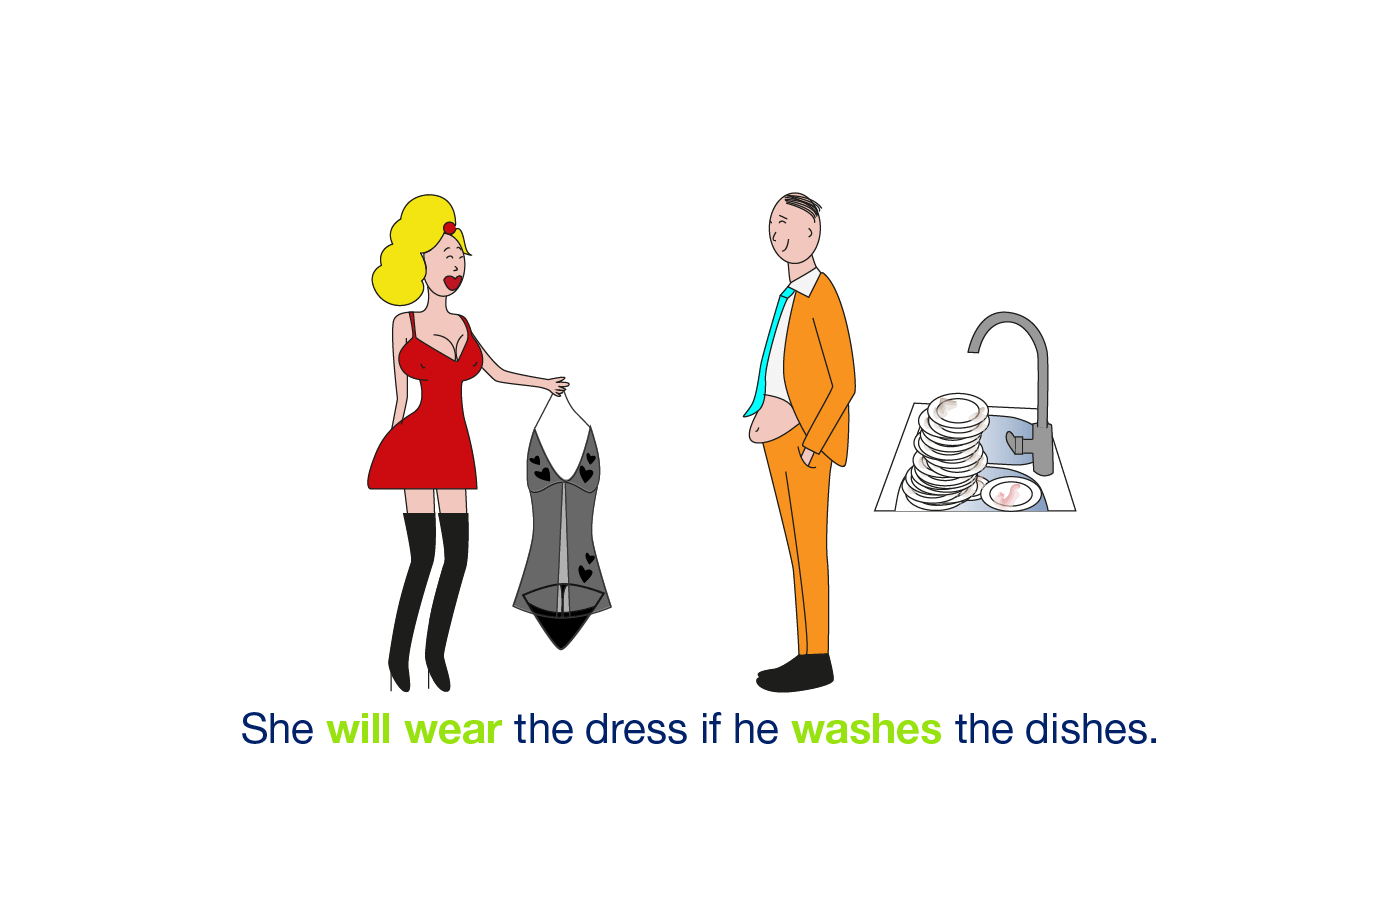 The woman will wear the dress if the man washes the dishes